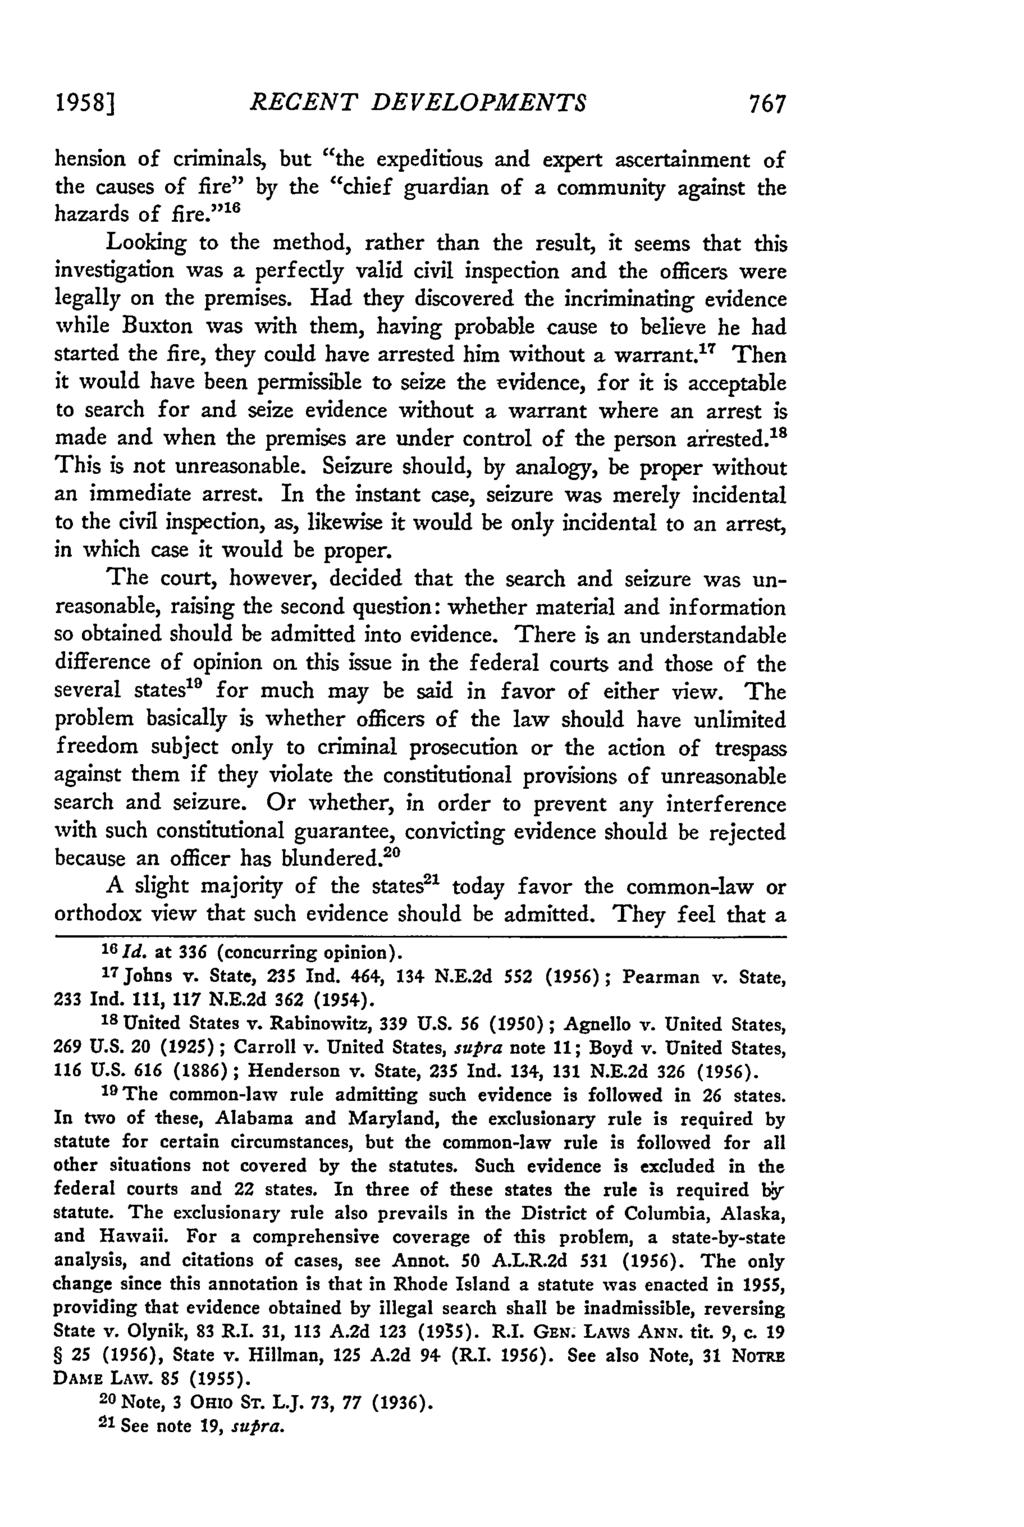 1958] RECENT DEVELOPMENTS hension of criminals, but "the expeditious and expert ascertainment of the causes of fire" by the "chief guardian of a community against the hazards of fire.